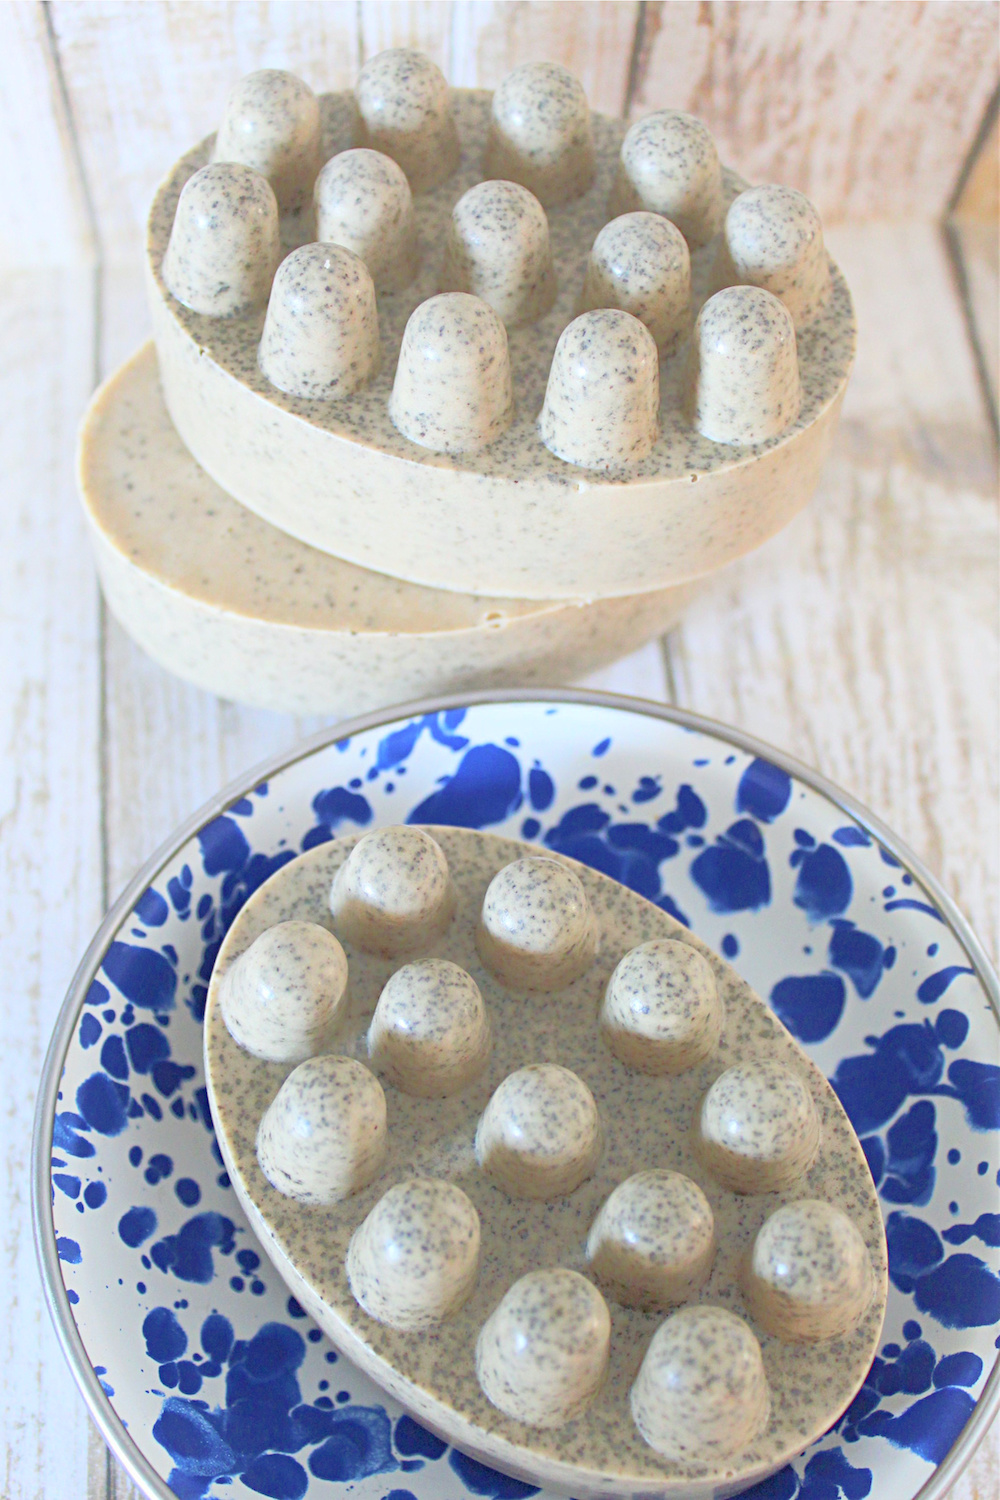 Exfoliating Coffee Soap Recipes: Melt and Pour - Get Green Be Well